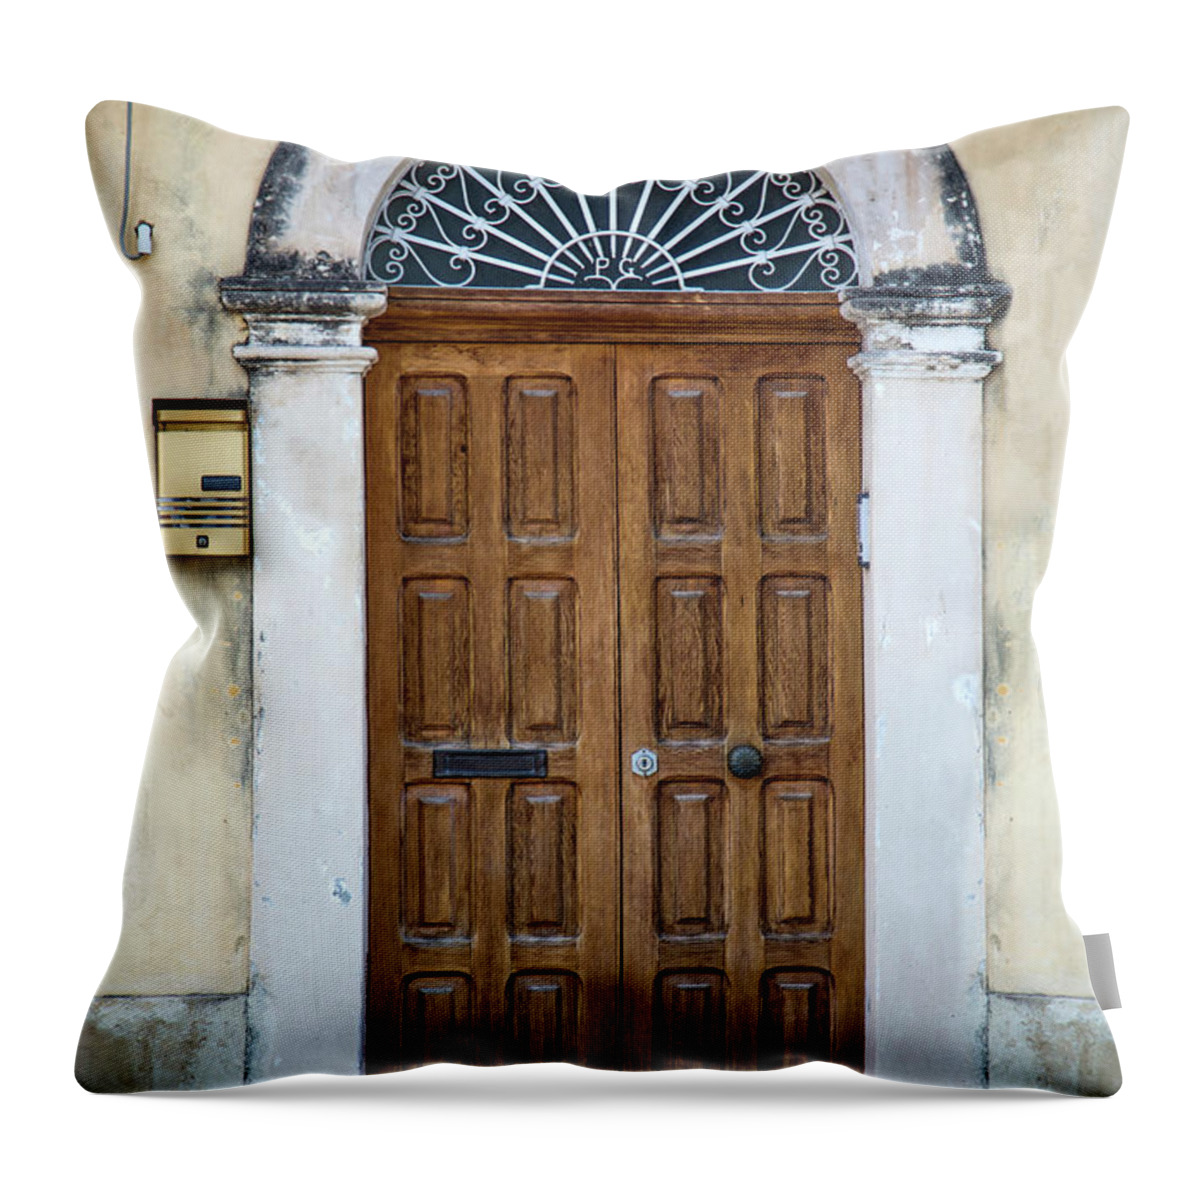 Handle Throw Pillow featuring the photograph Door From Sicily by Boggy22